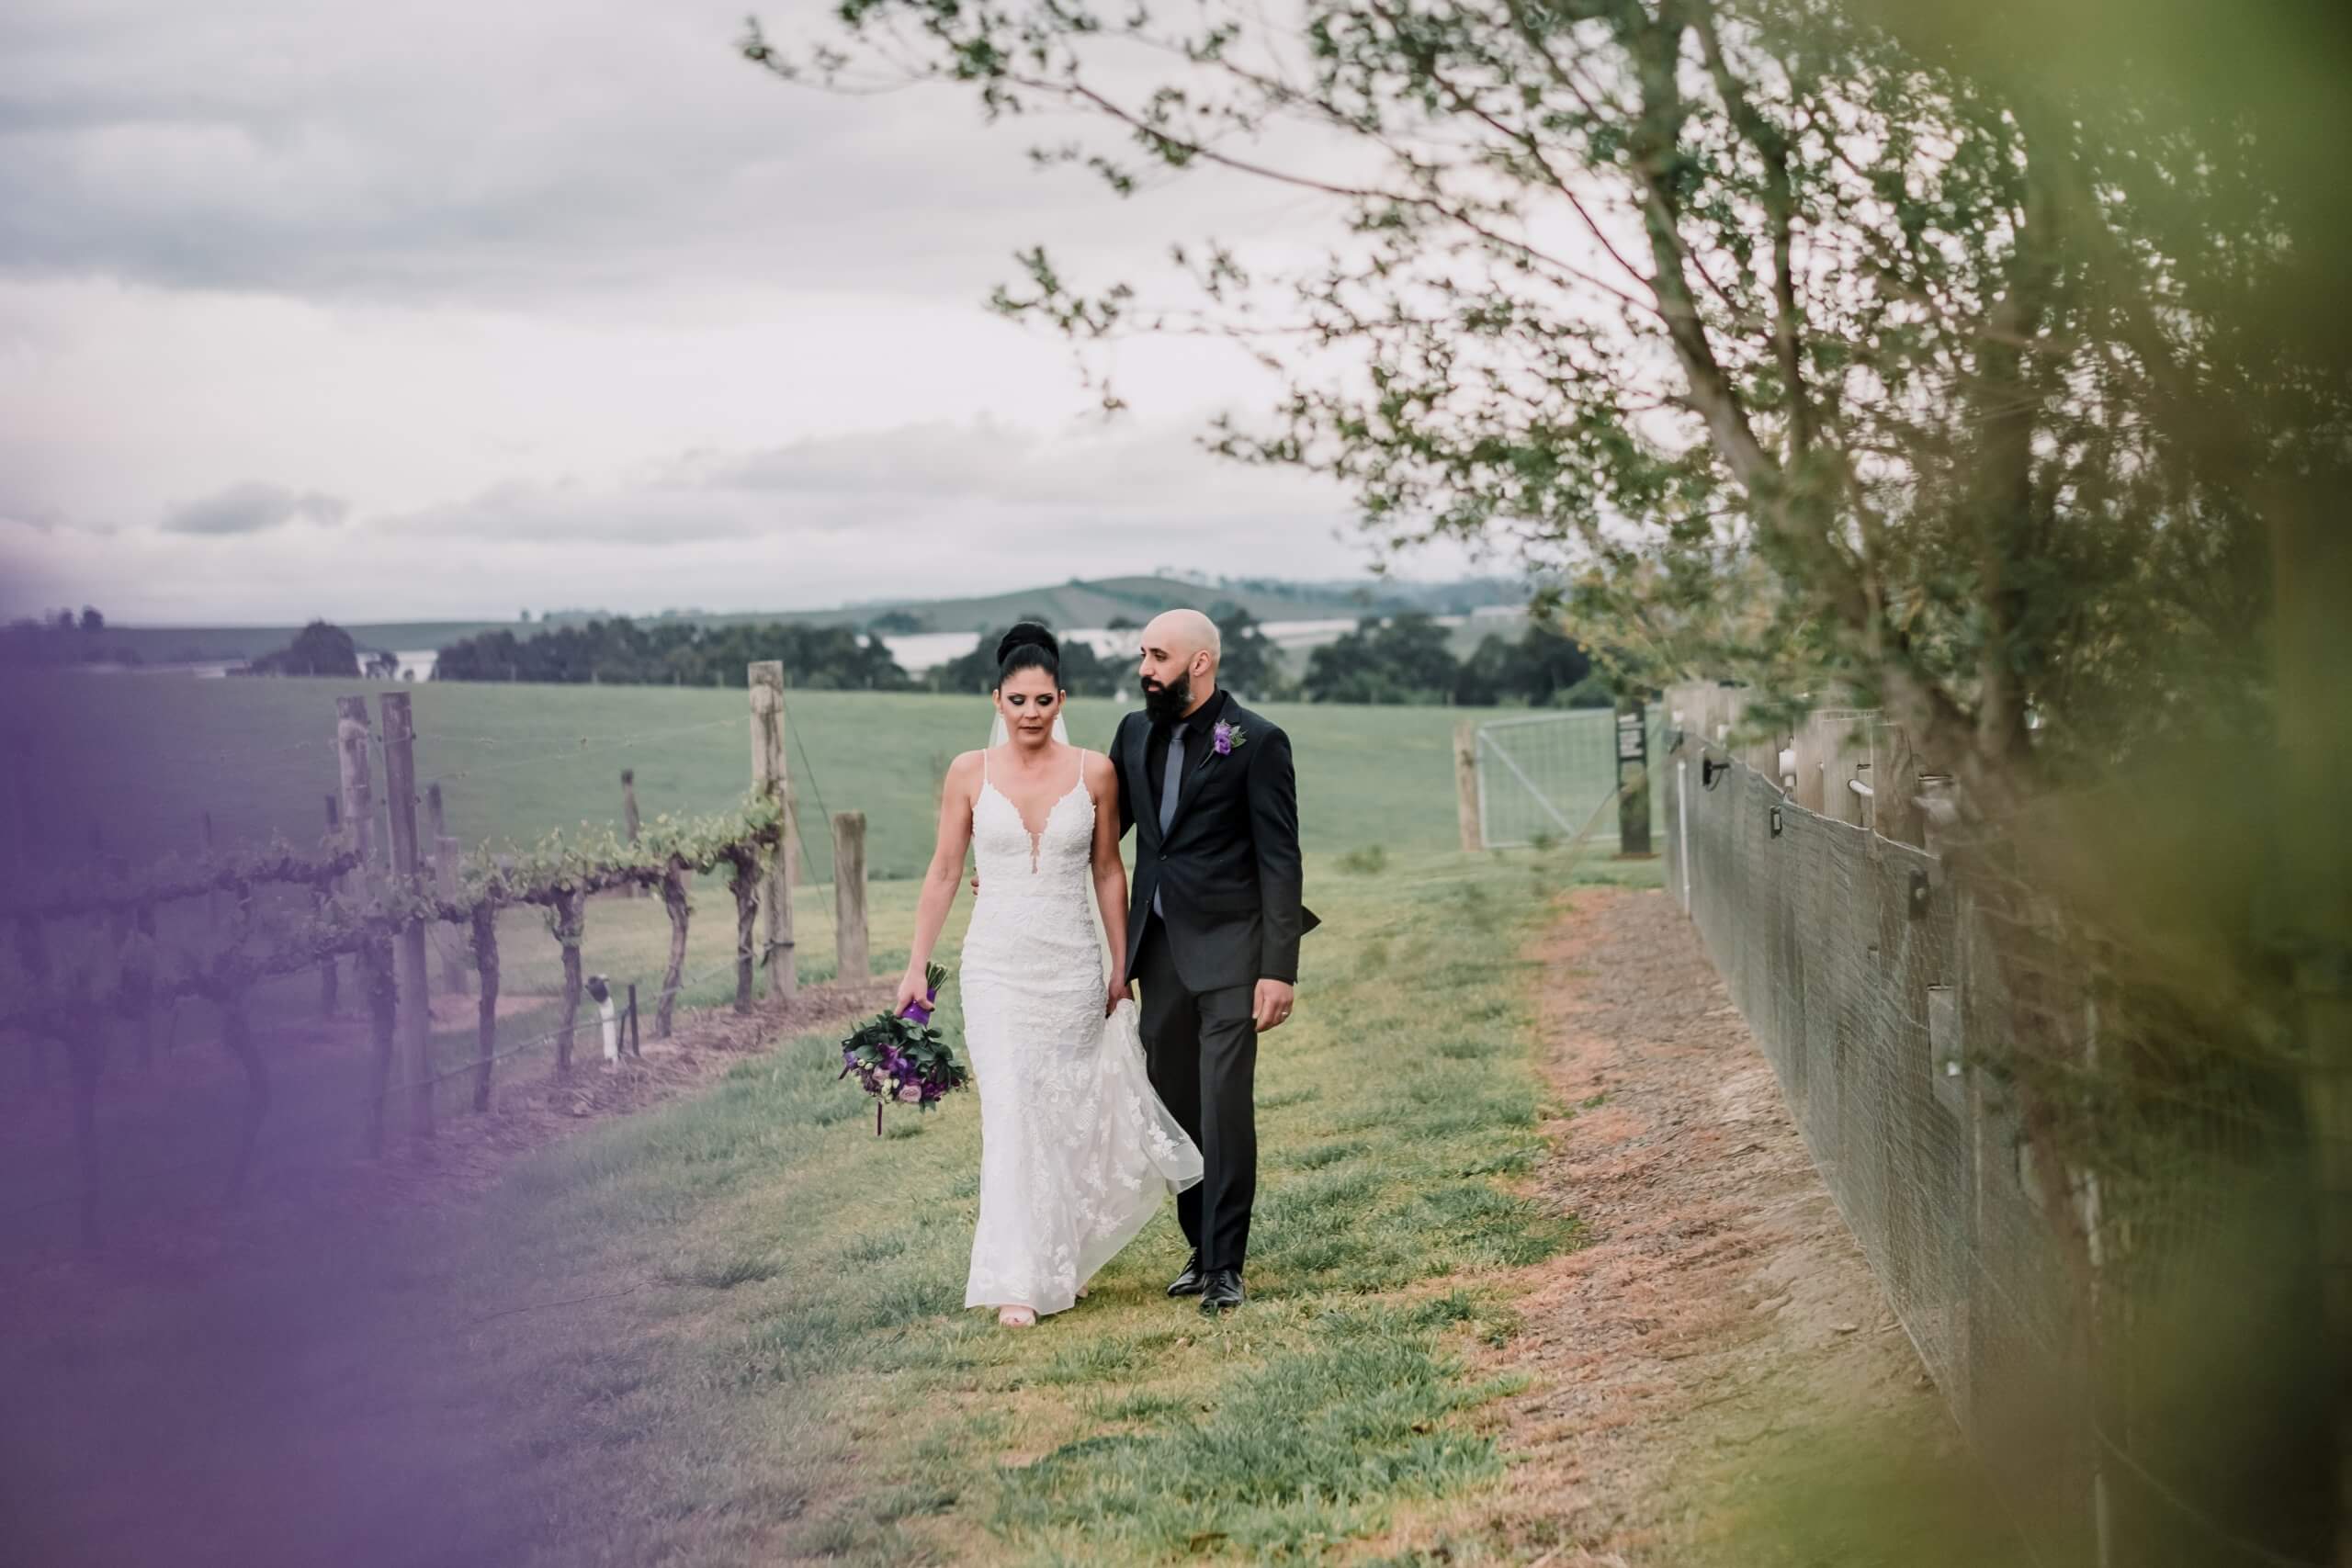 Beautiful couple in a beautiful rustic field makes for a perfect wedding shoot location, captured by Black Avenue Productions